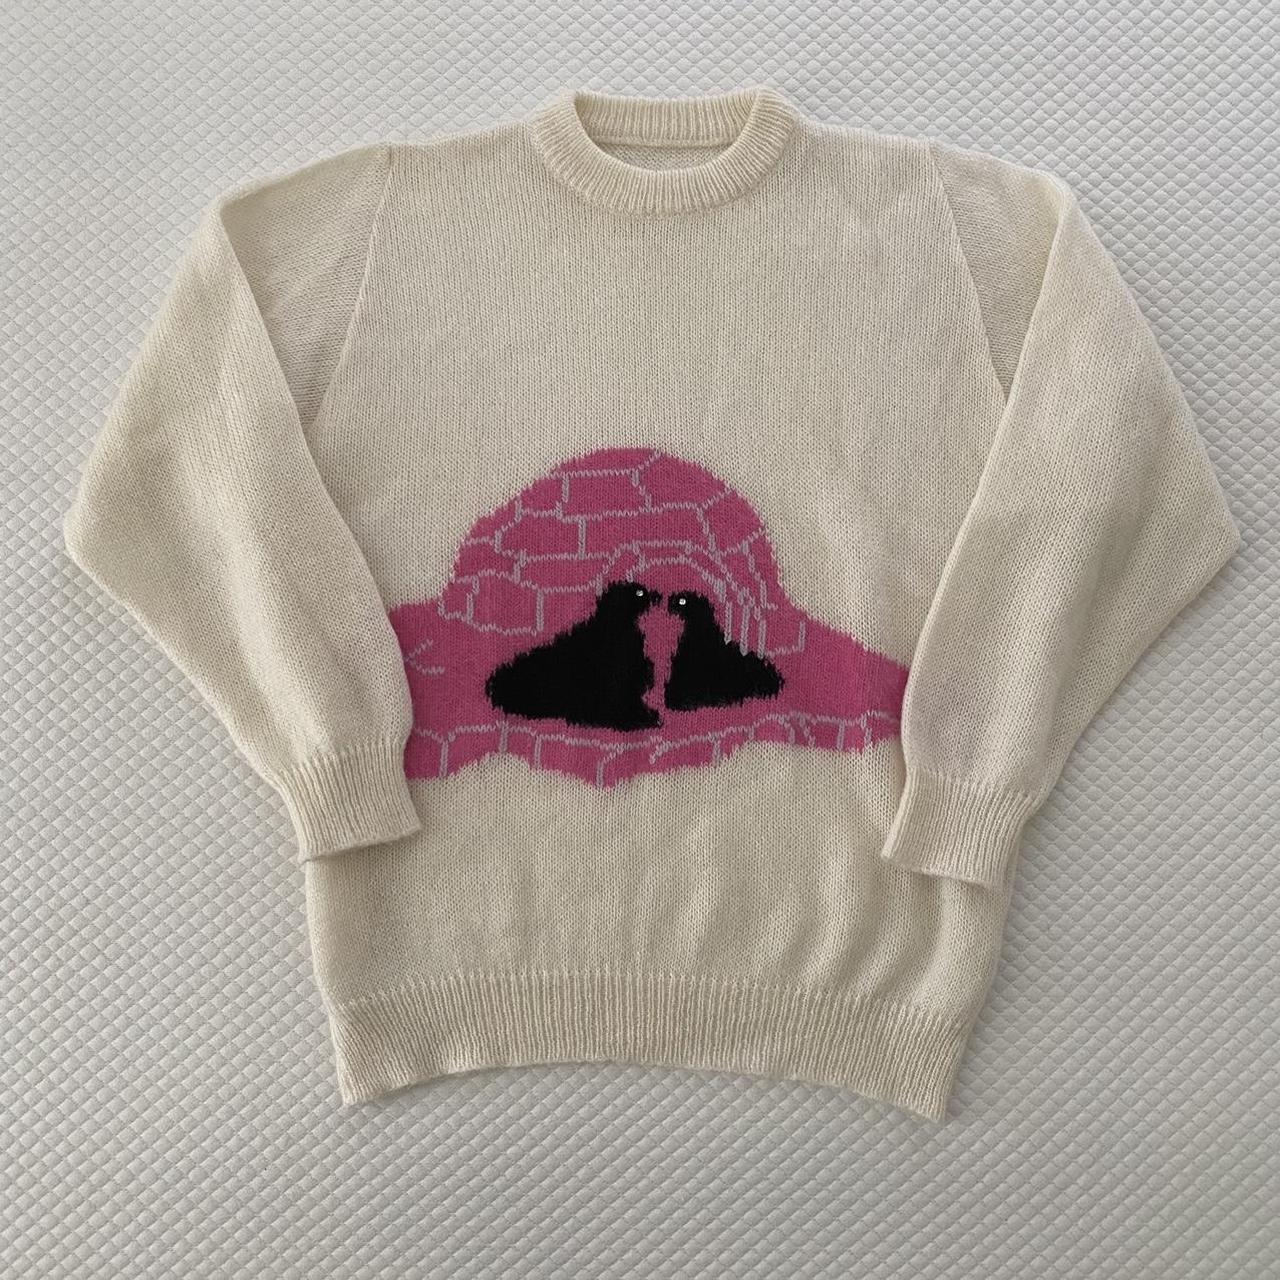 Vintage mohair knit jumper Cream with pink ice... - Depop